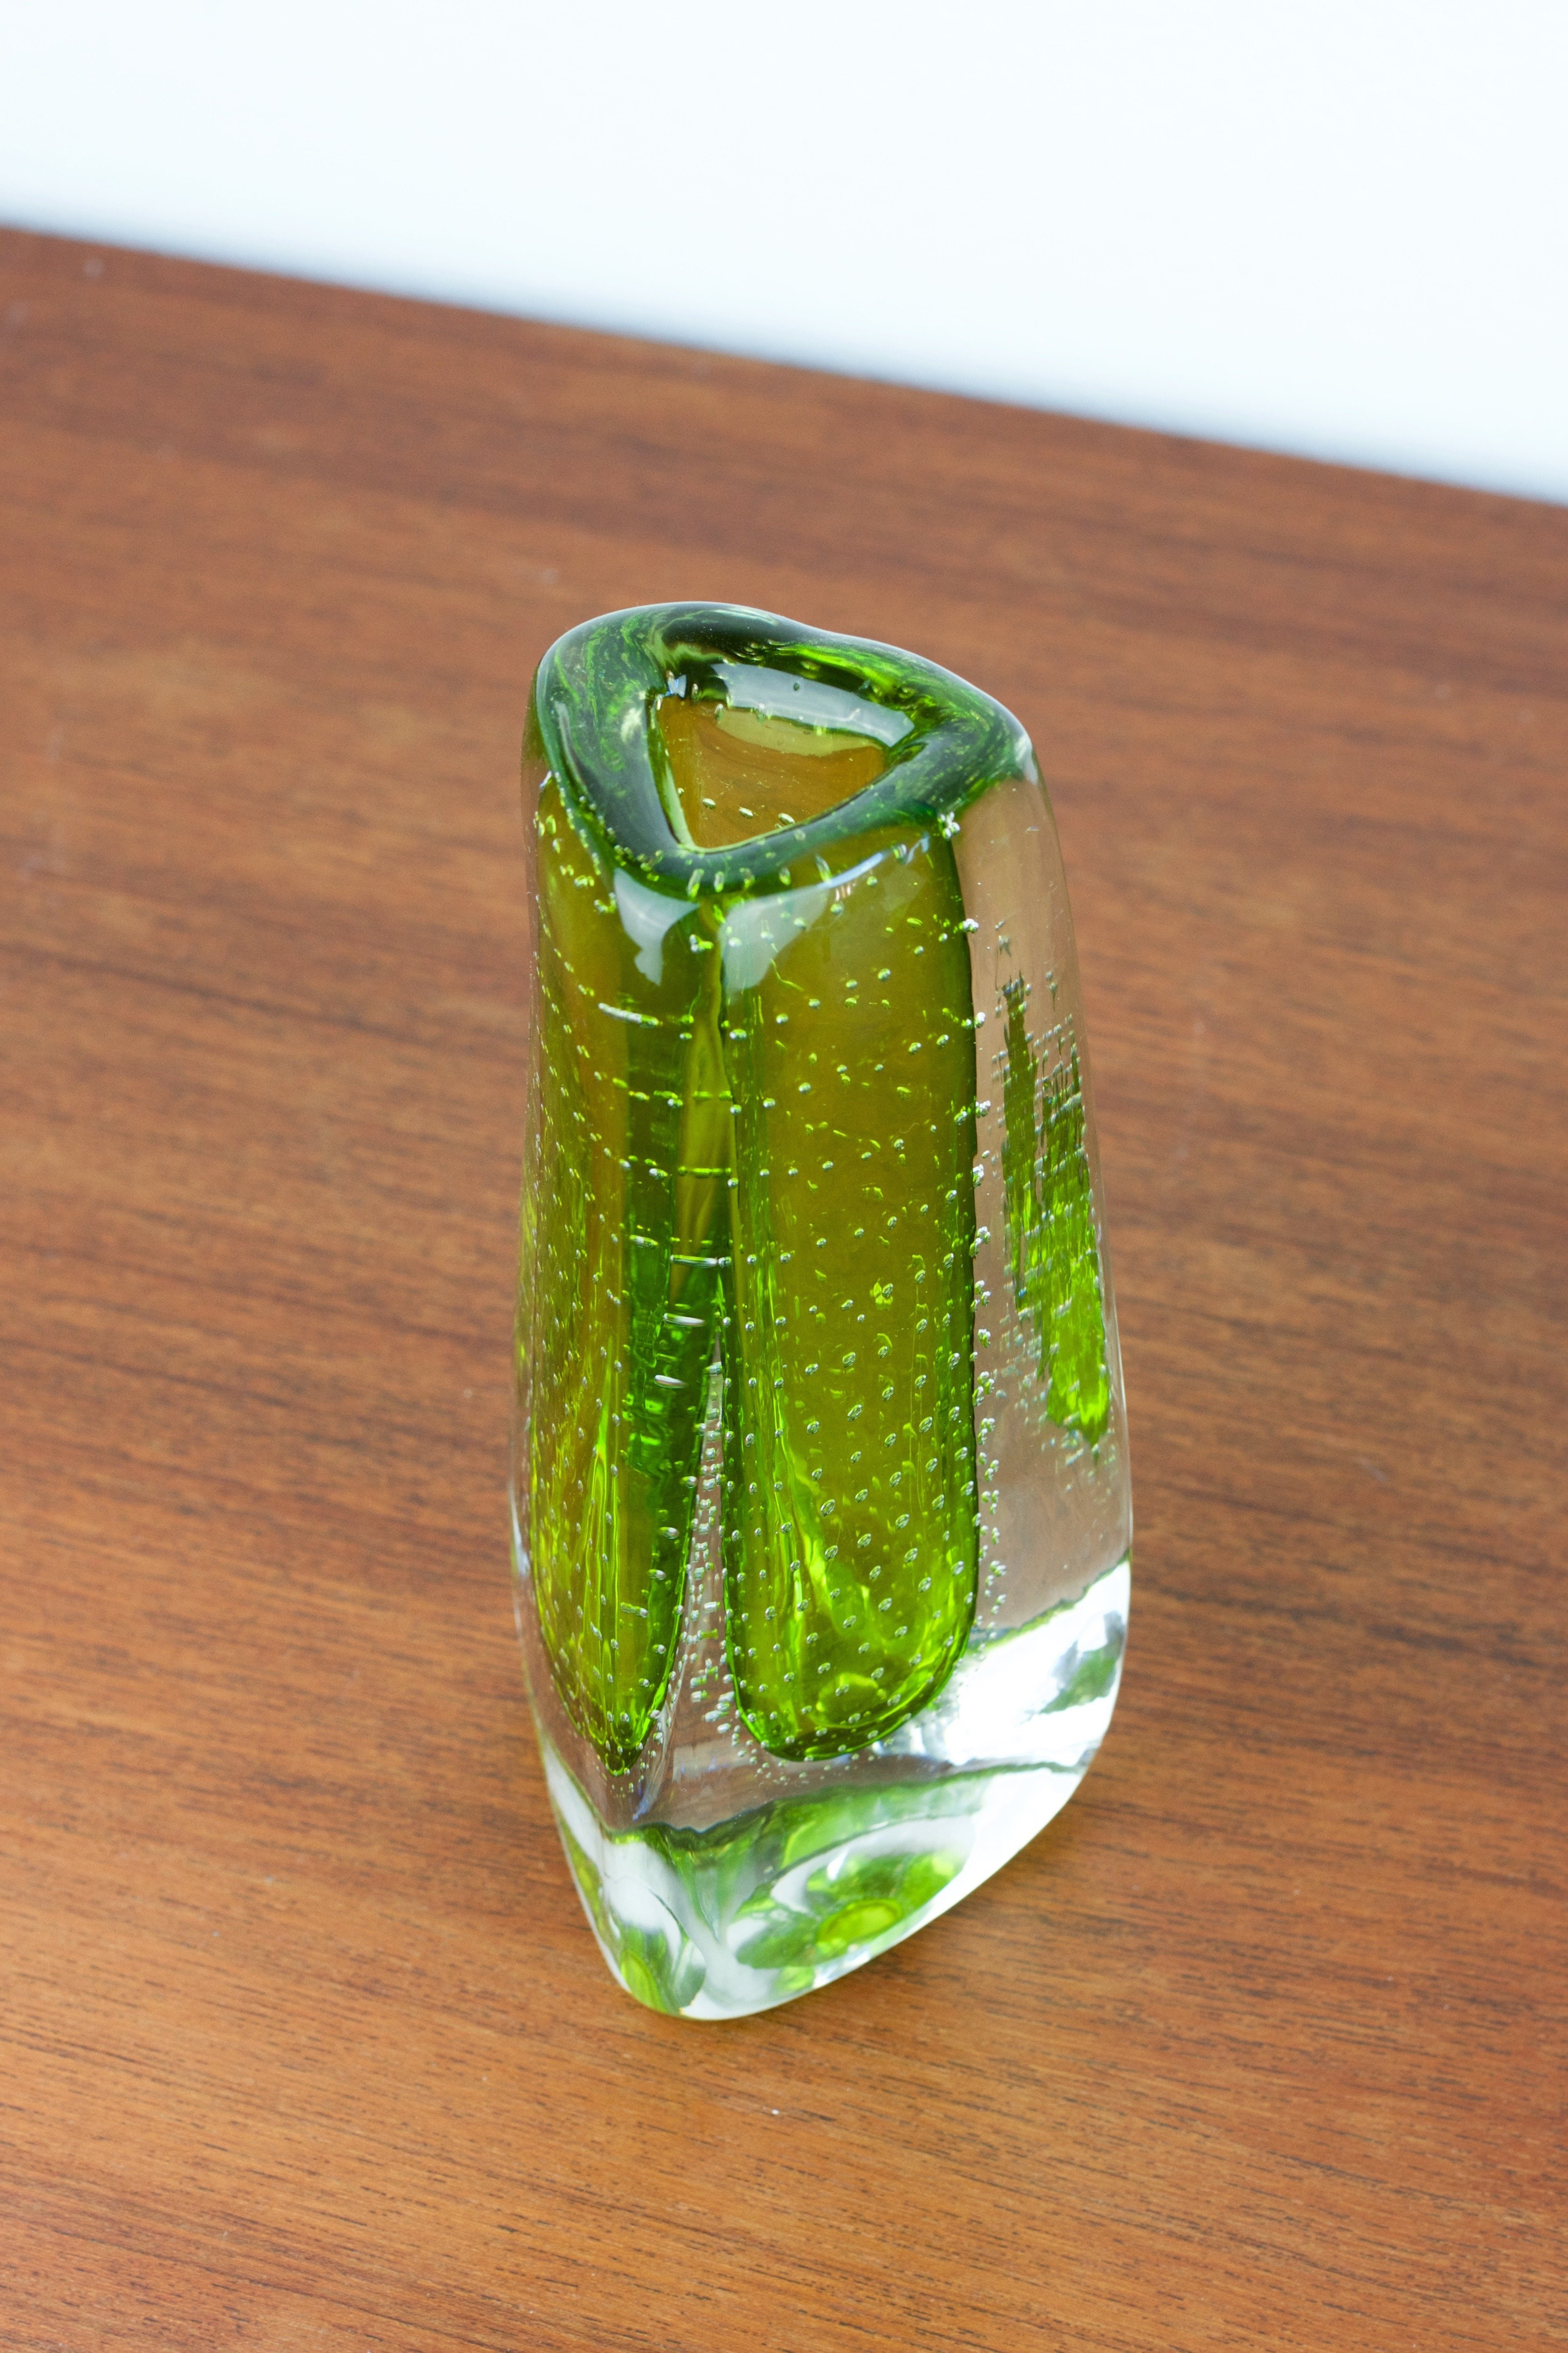 30 Lovable Amber Bubble Glass Vase 2023 free download amber bubble glass vase of large and heavy 1970s german emerald green bubble ice glass vase within large and heavy 1970s german emerald green bubble ice glass vase theresienthal at 1stdibs